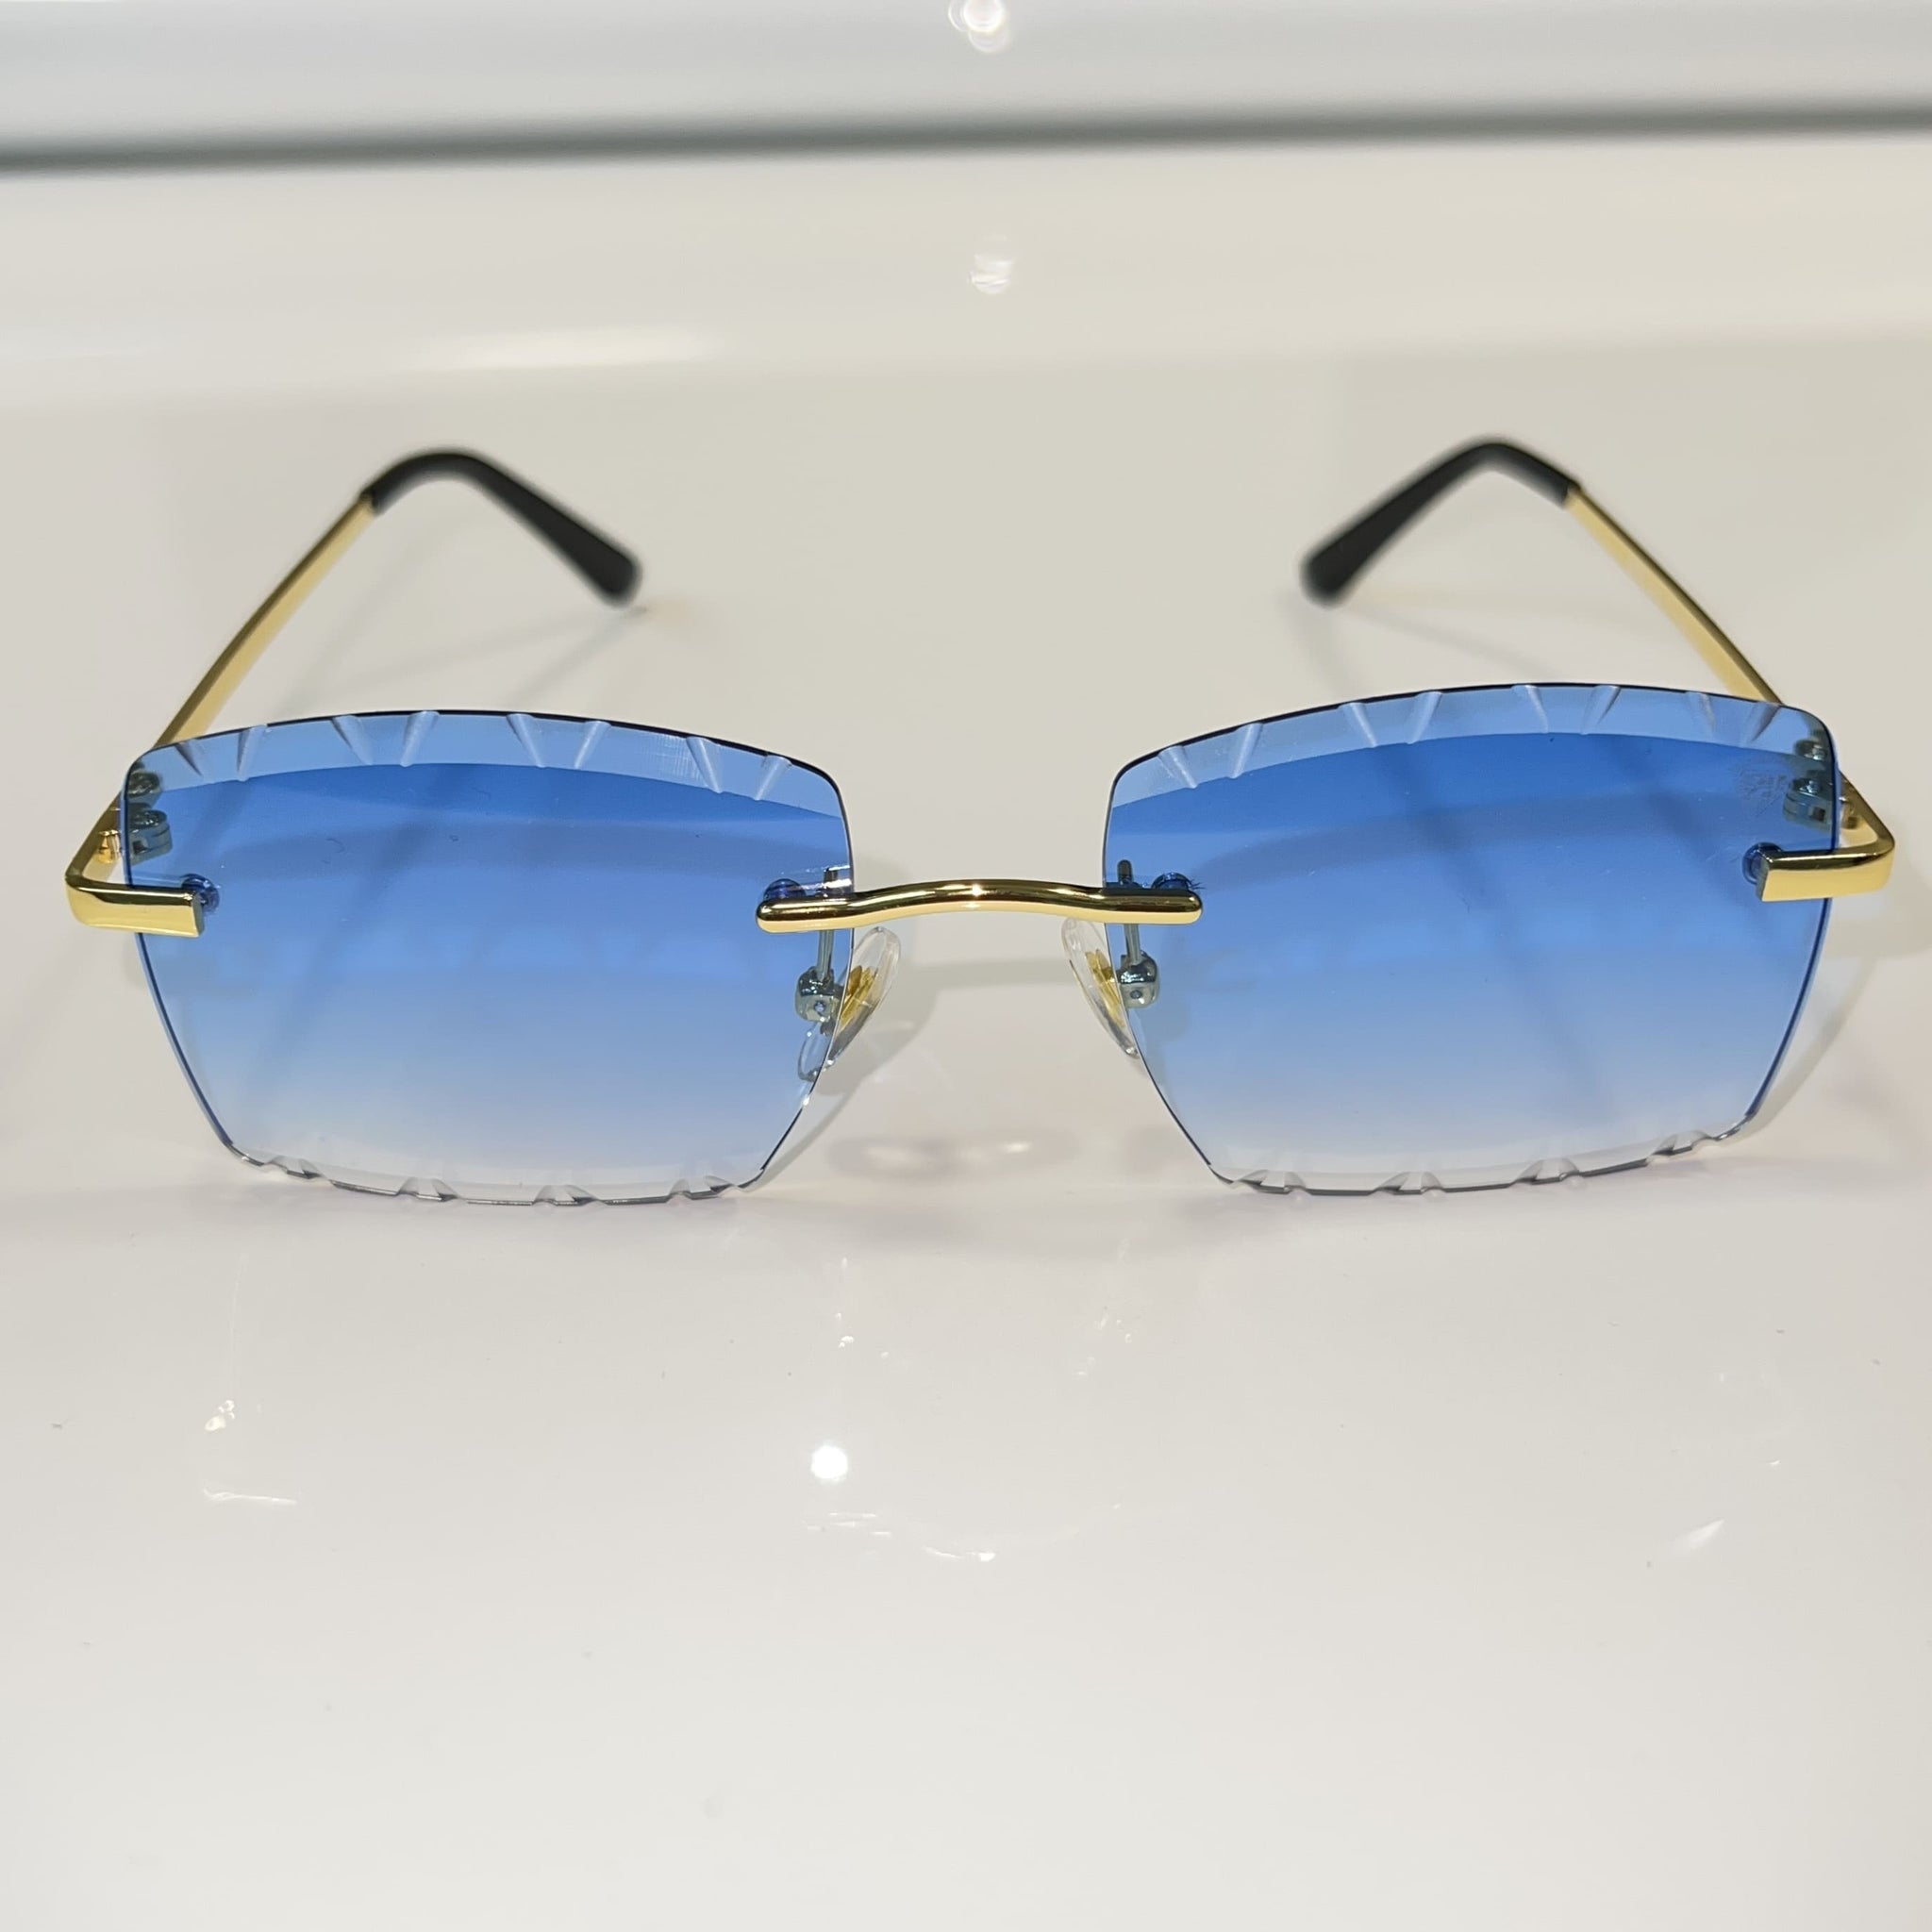 Dripcut Glasses - 14k gold plated - Blue Shade - Sehgal Glasses